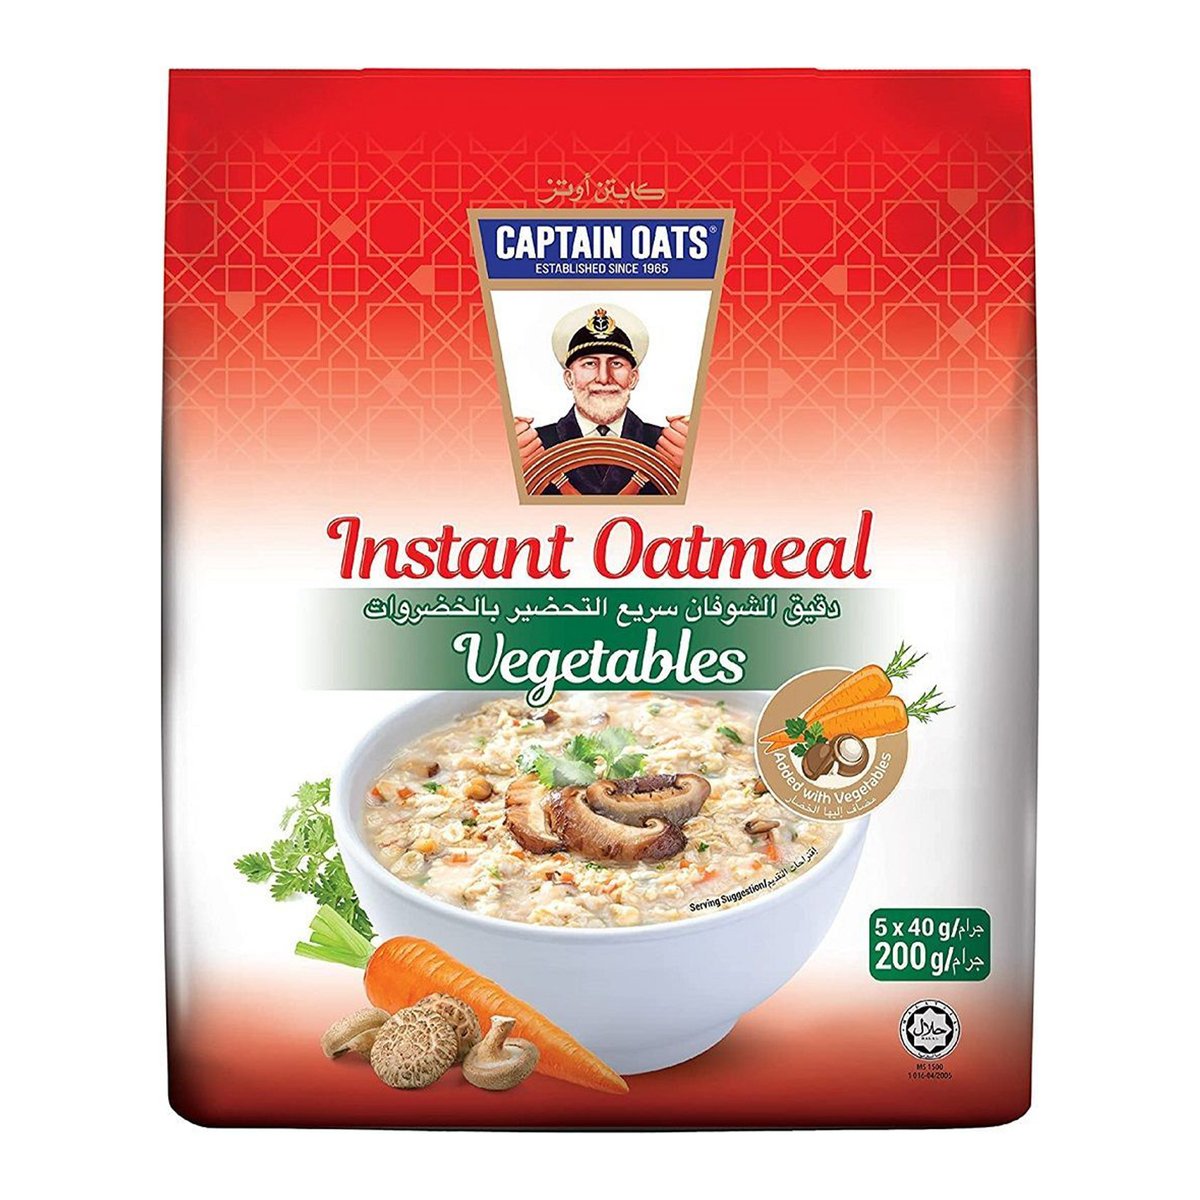 Captain Oats Instant Oatmeal With Vegetable 5 x 40 g